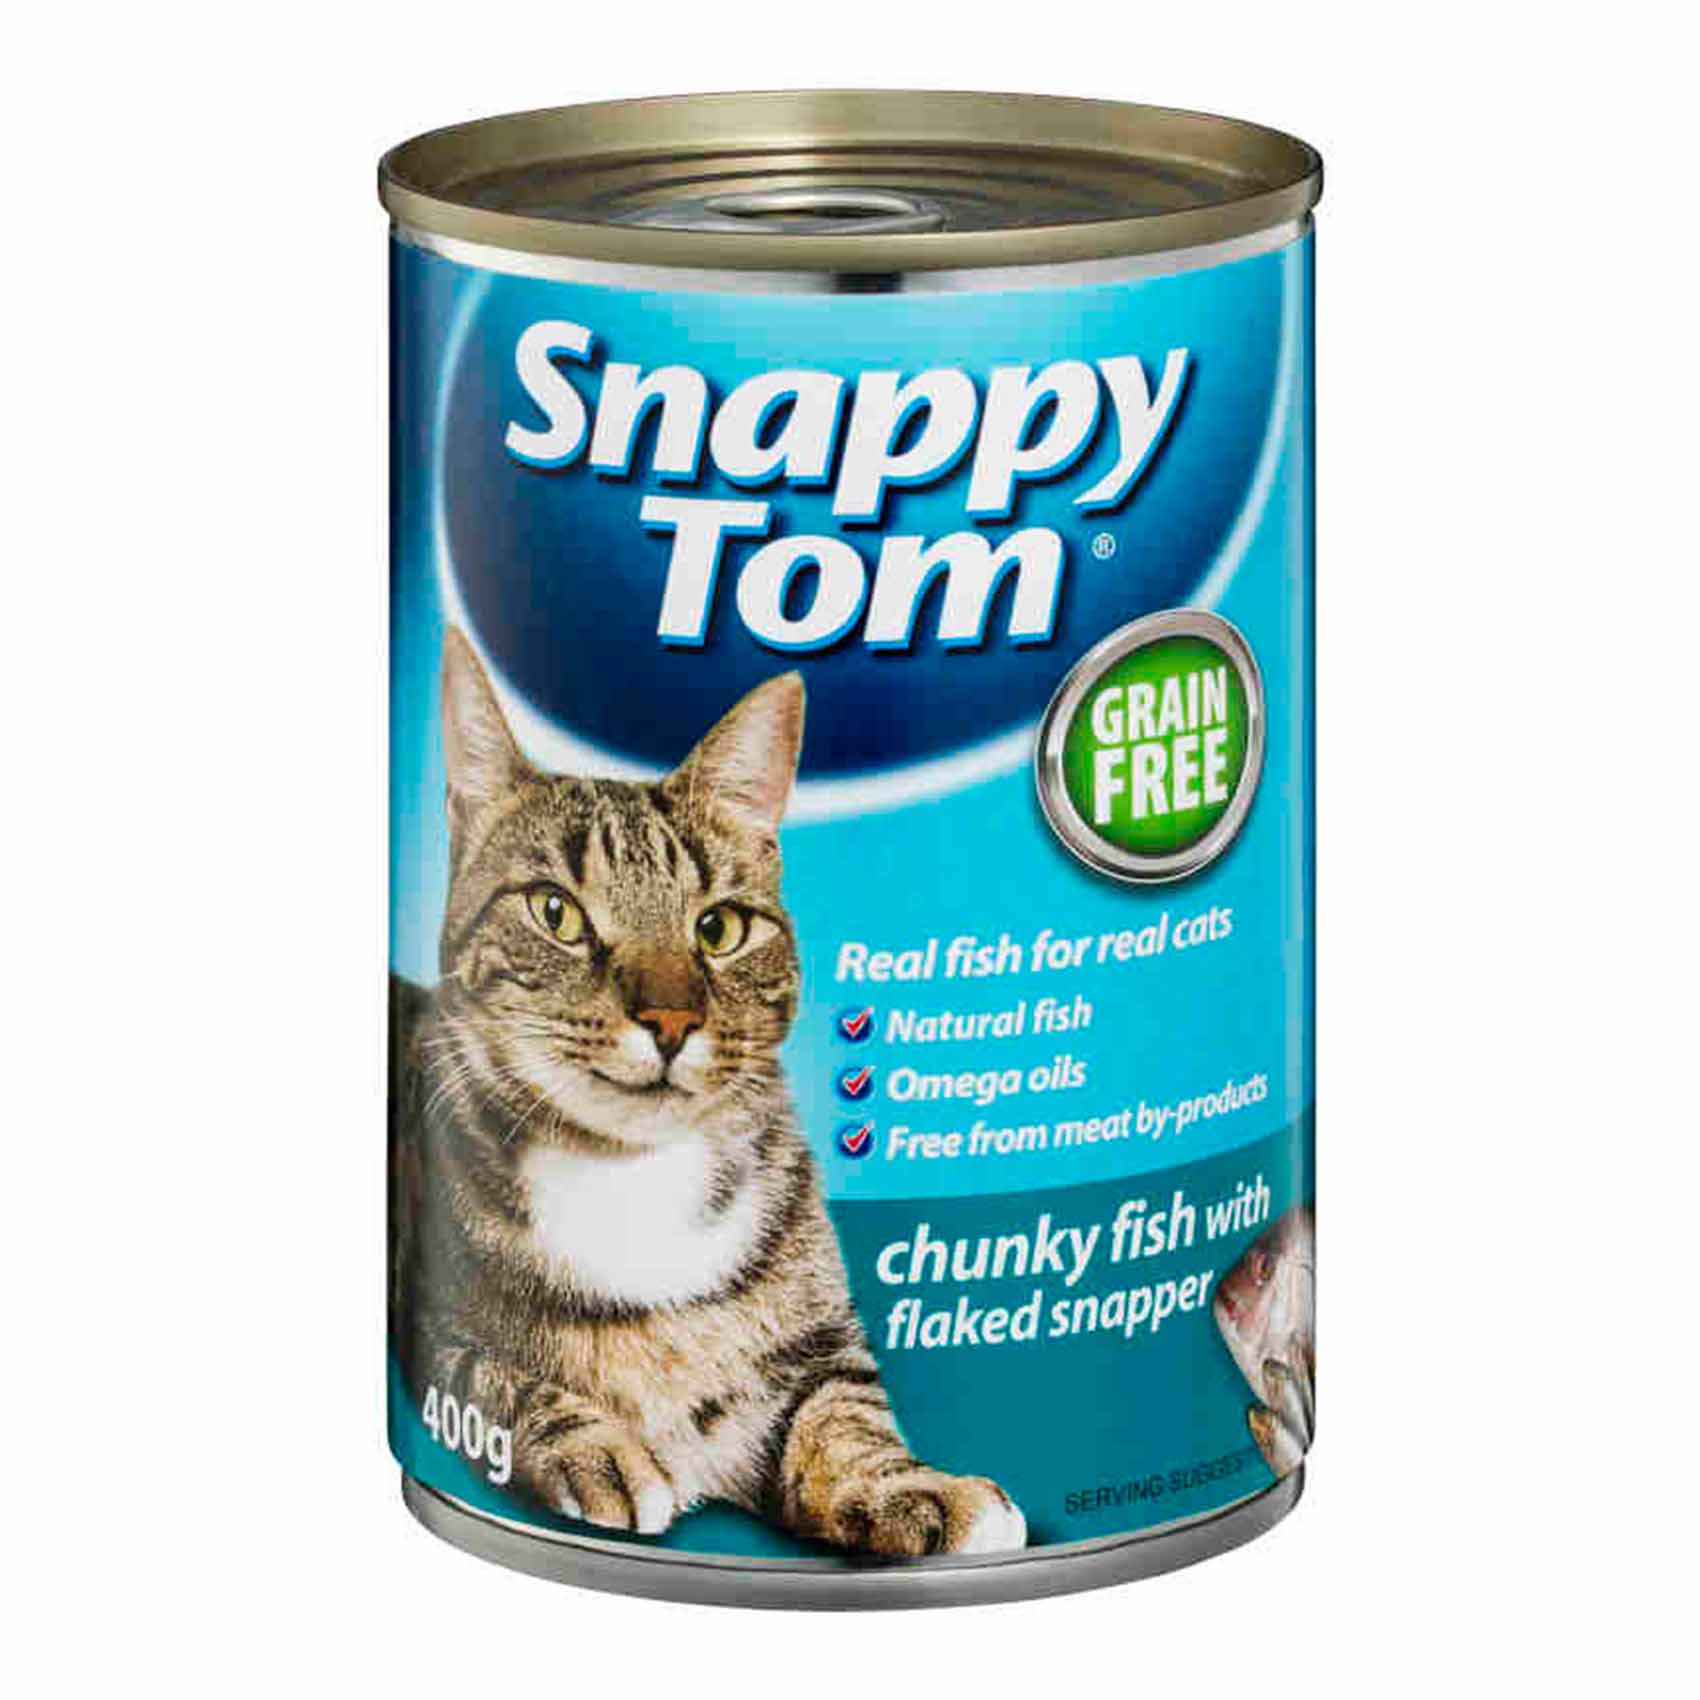 Snappy Tom Real Fish And Grain Free Chunky Fish With Flaked Snapper Cat Food 400g